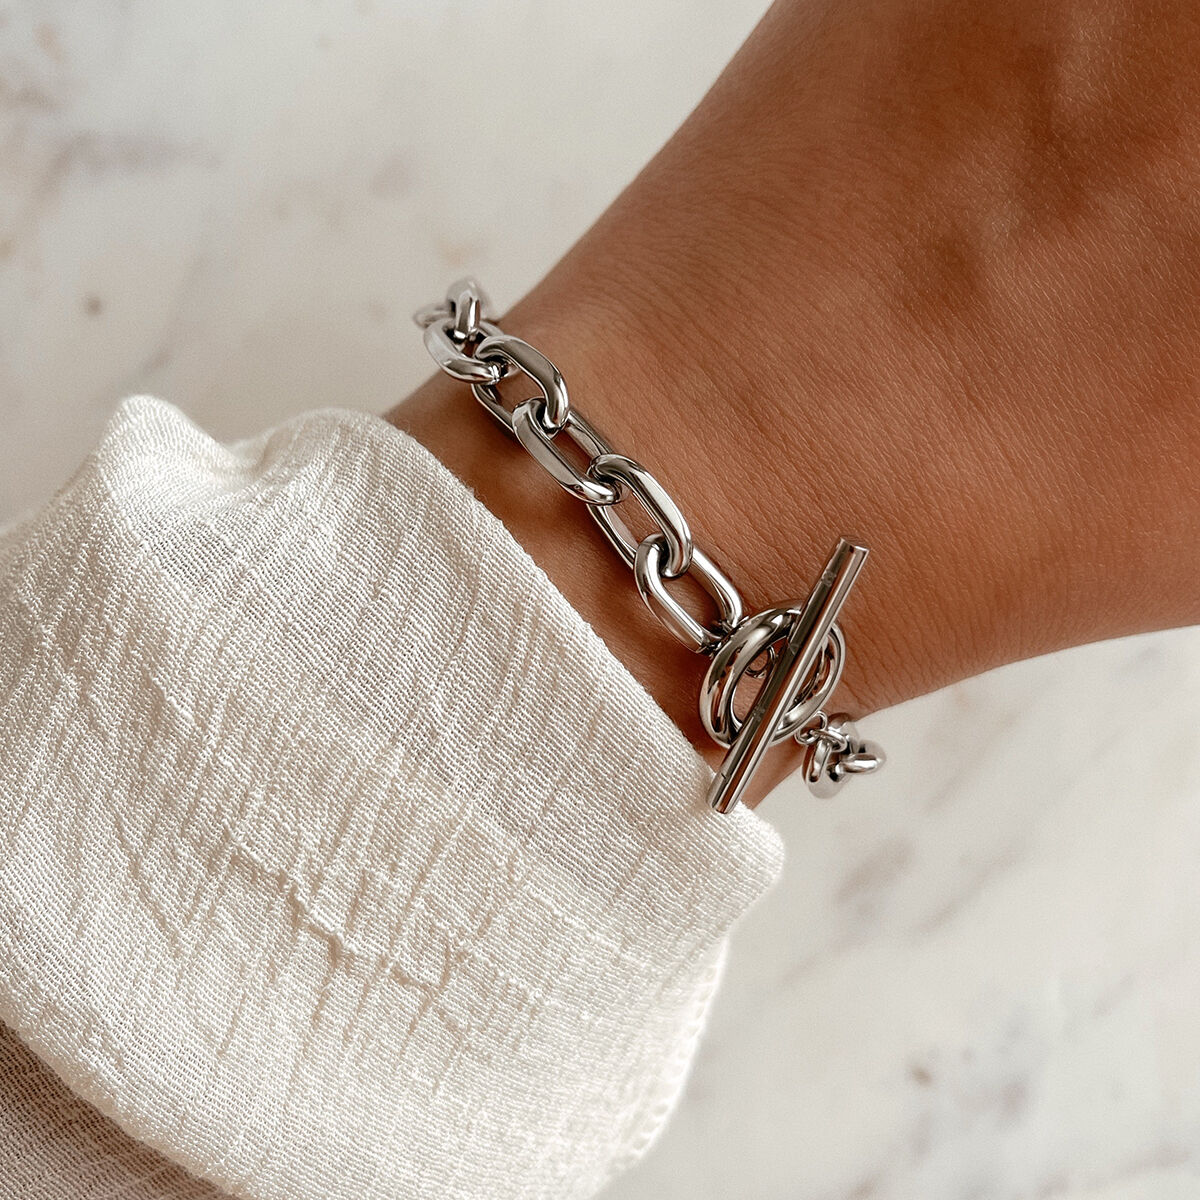 Chunky Silver Link Bracelet Big Silver Chain Bracelet Hammered Sterling  Silver Jewelry - Etsy | Silver link bracelet, Sterling silver bracelets,  Modern silver jewelry